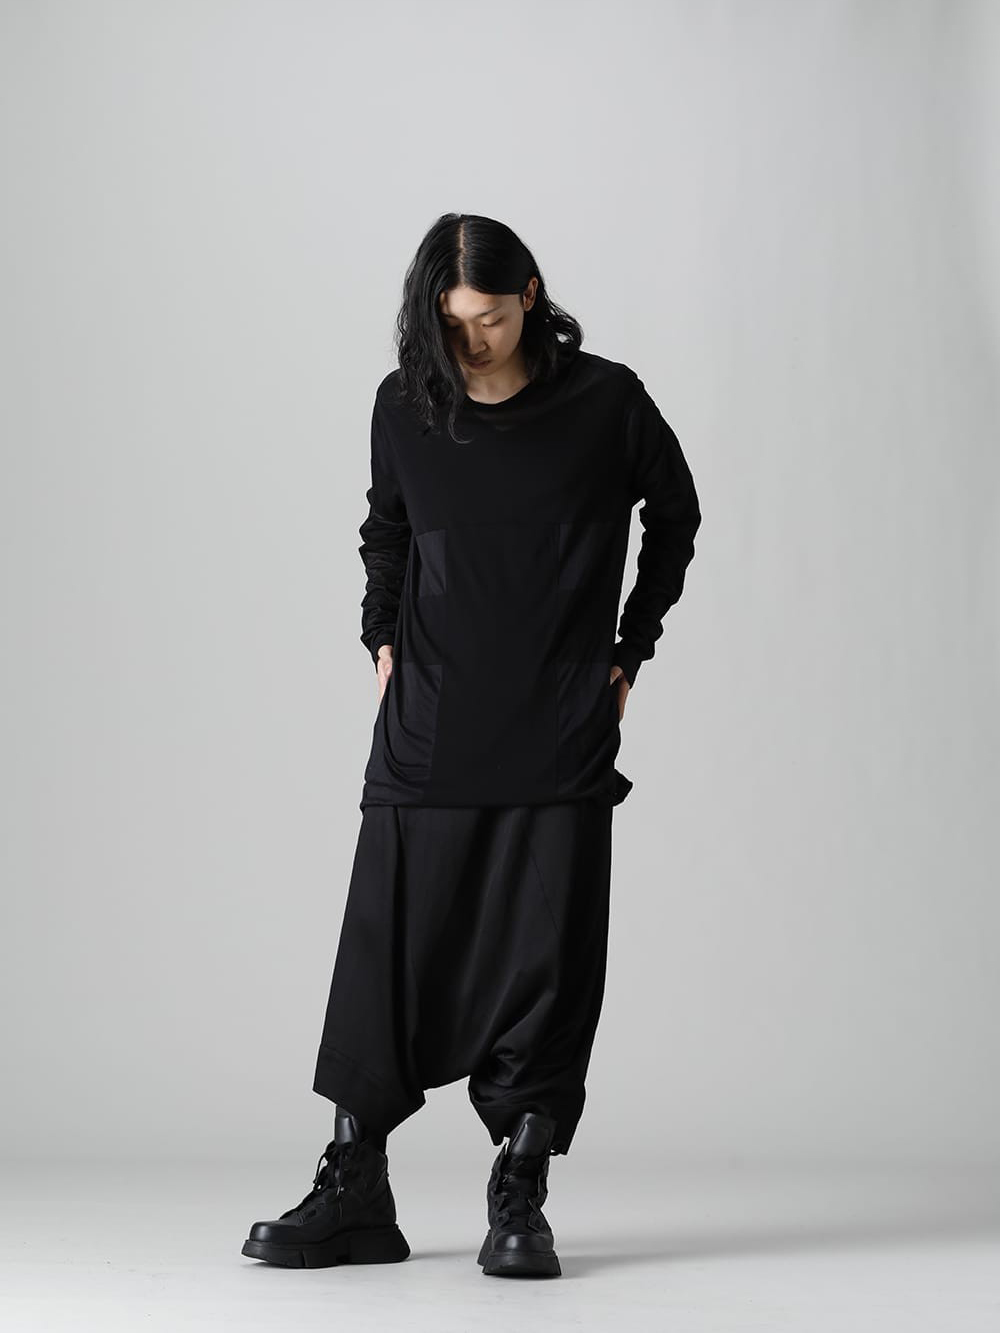 Now in stock is the 5th delivery from the spring/summer collection of JULIUS 2022. Both in-store and online available now - Whole body front A cut sew that you can enjoy layering with a see-through and cool impression. - 777CUM4(Cotton Sheer Jersey L/S Cutsewn) - 1-014